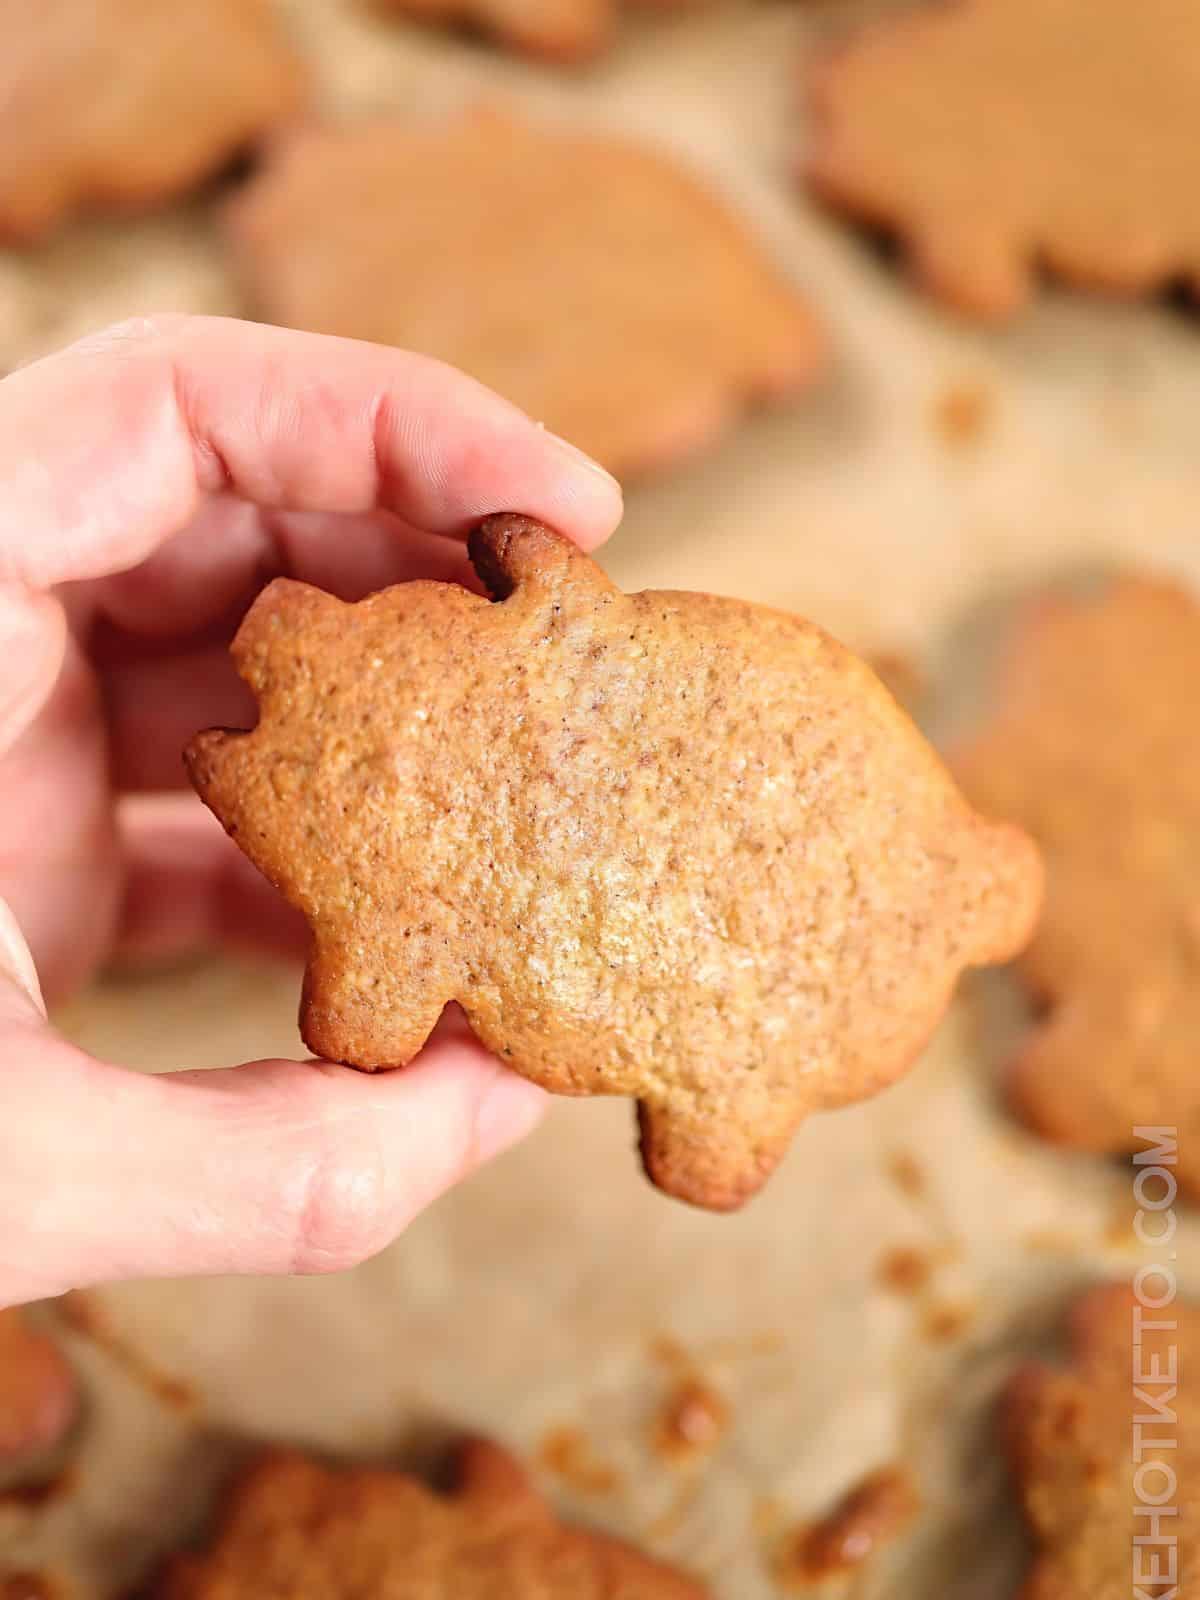 A person holding a pig shaped cookie.